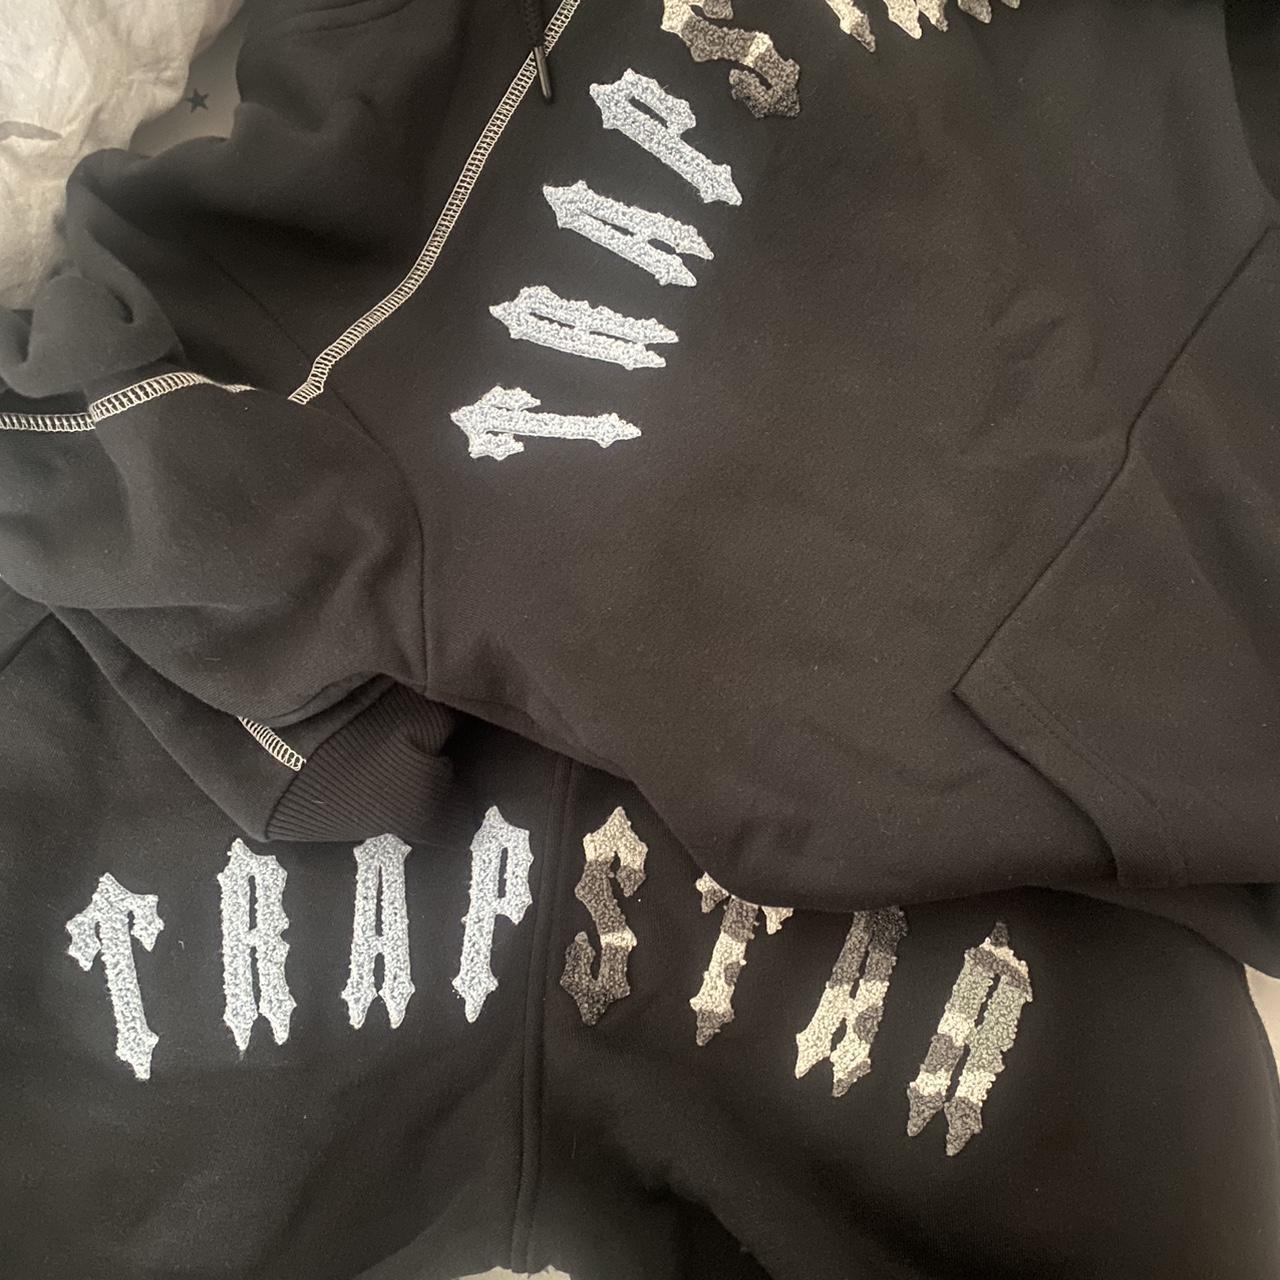 Trapstar full tracksuit rare 180 can deliver quick... - Depop